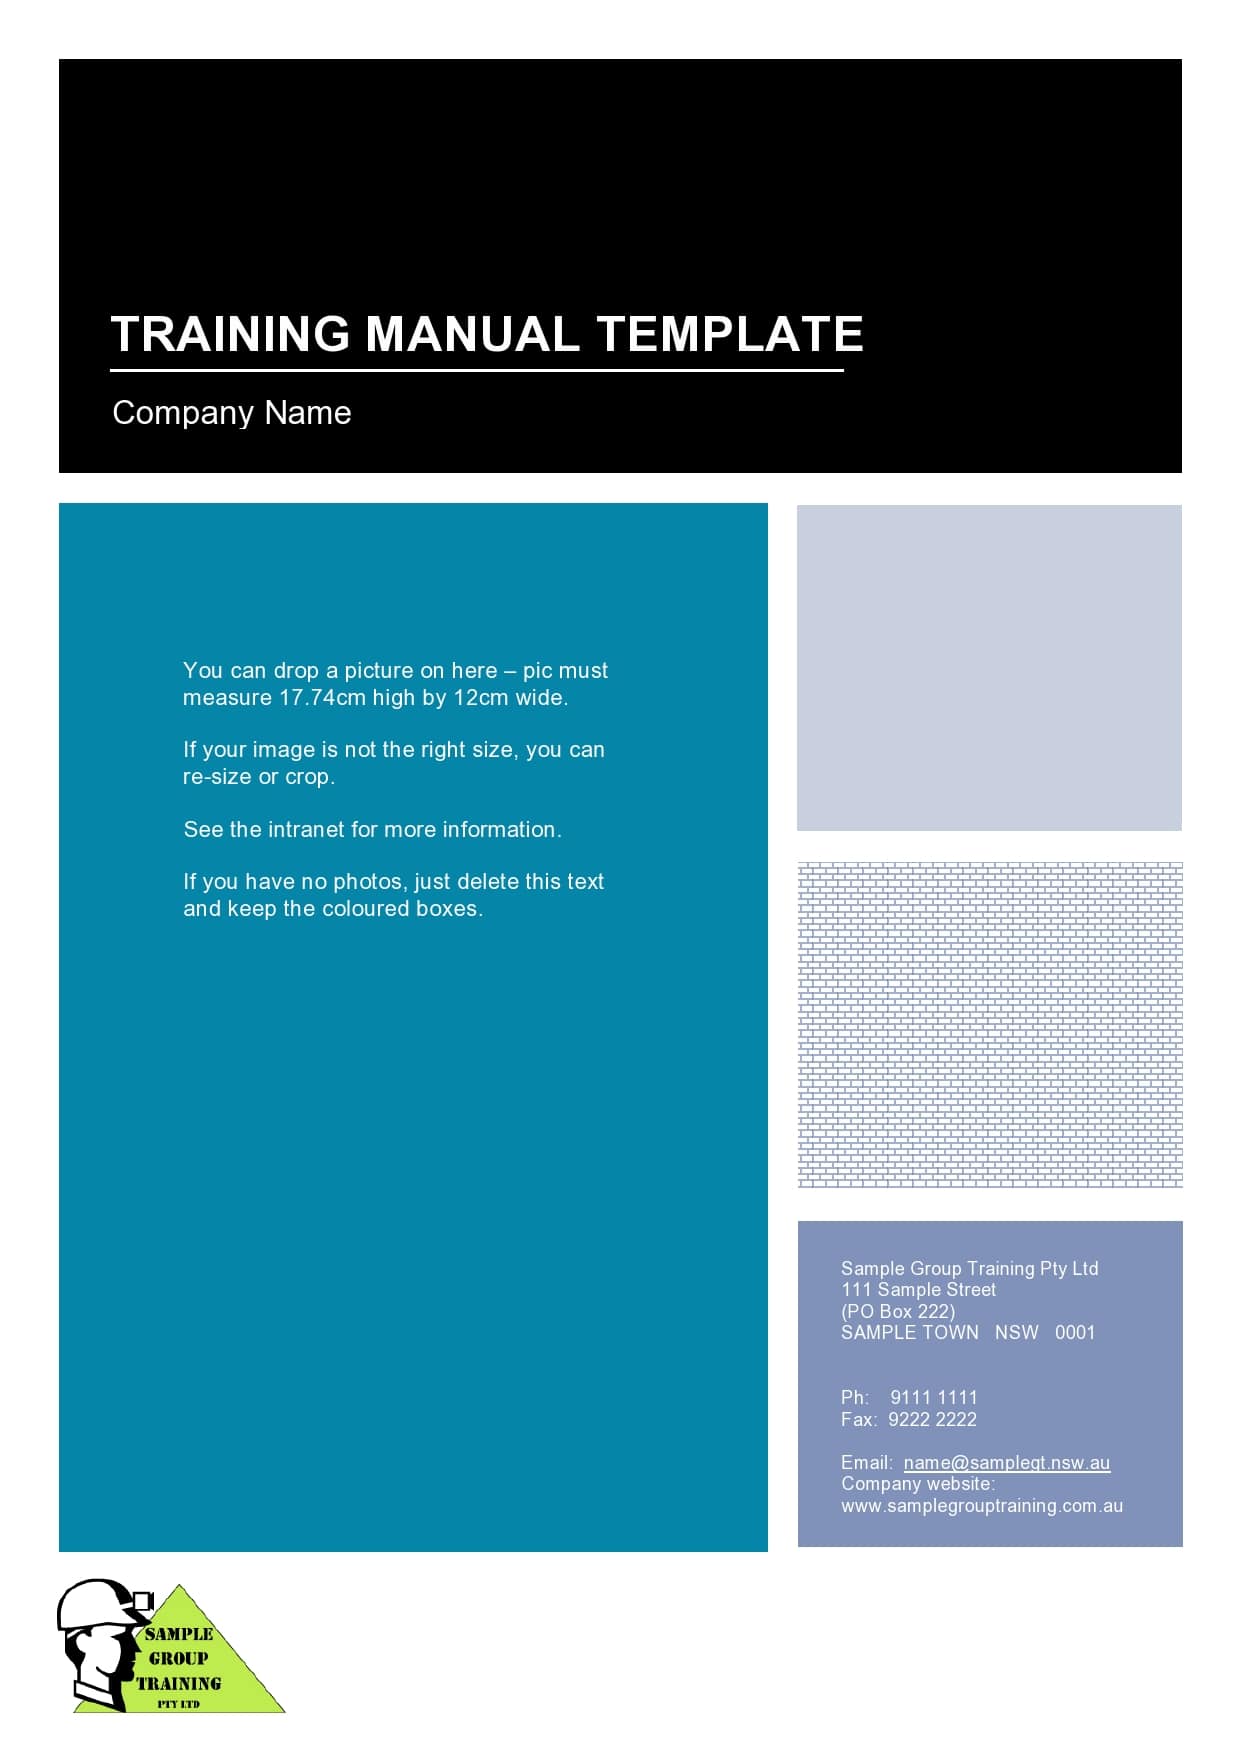 23 Best Training Manual Templates (+Examples) - TemplateArchive With Training Documentation Template Word